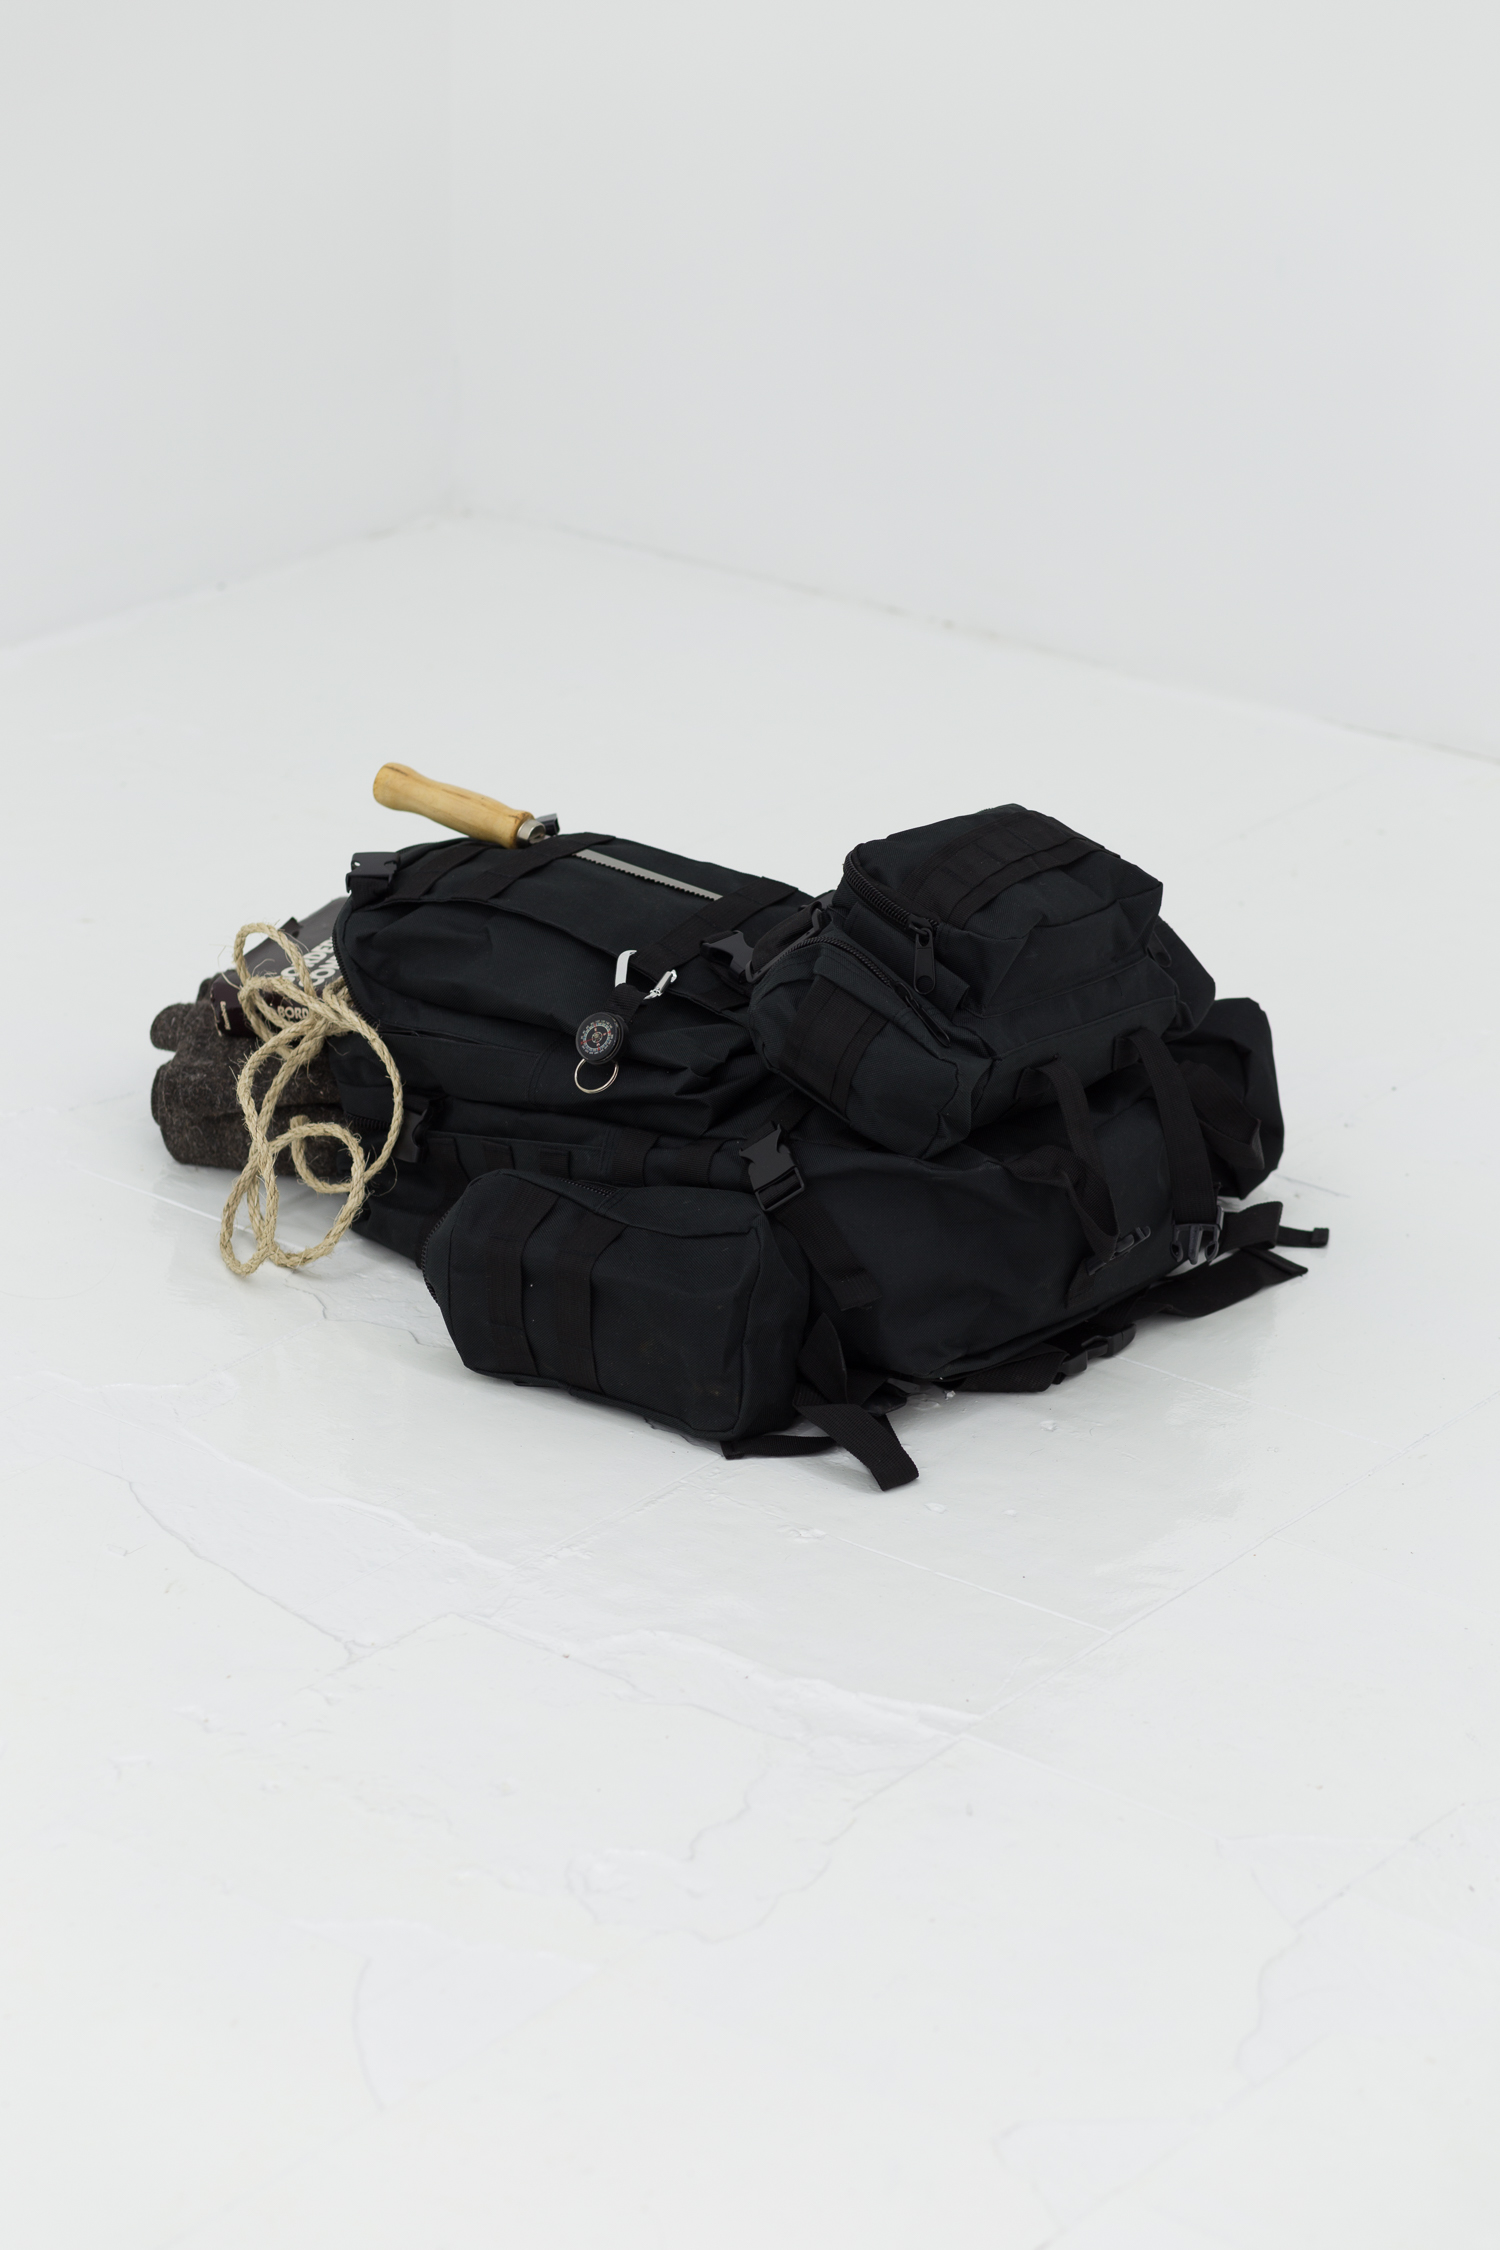 A black technical backpack sits on the floor